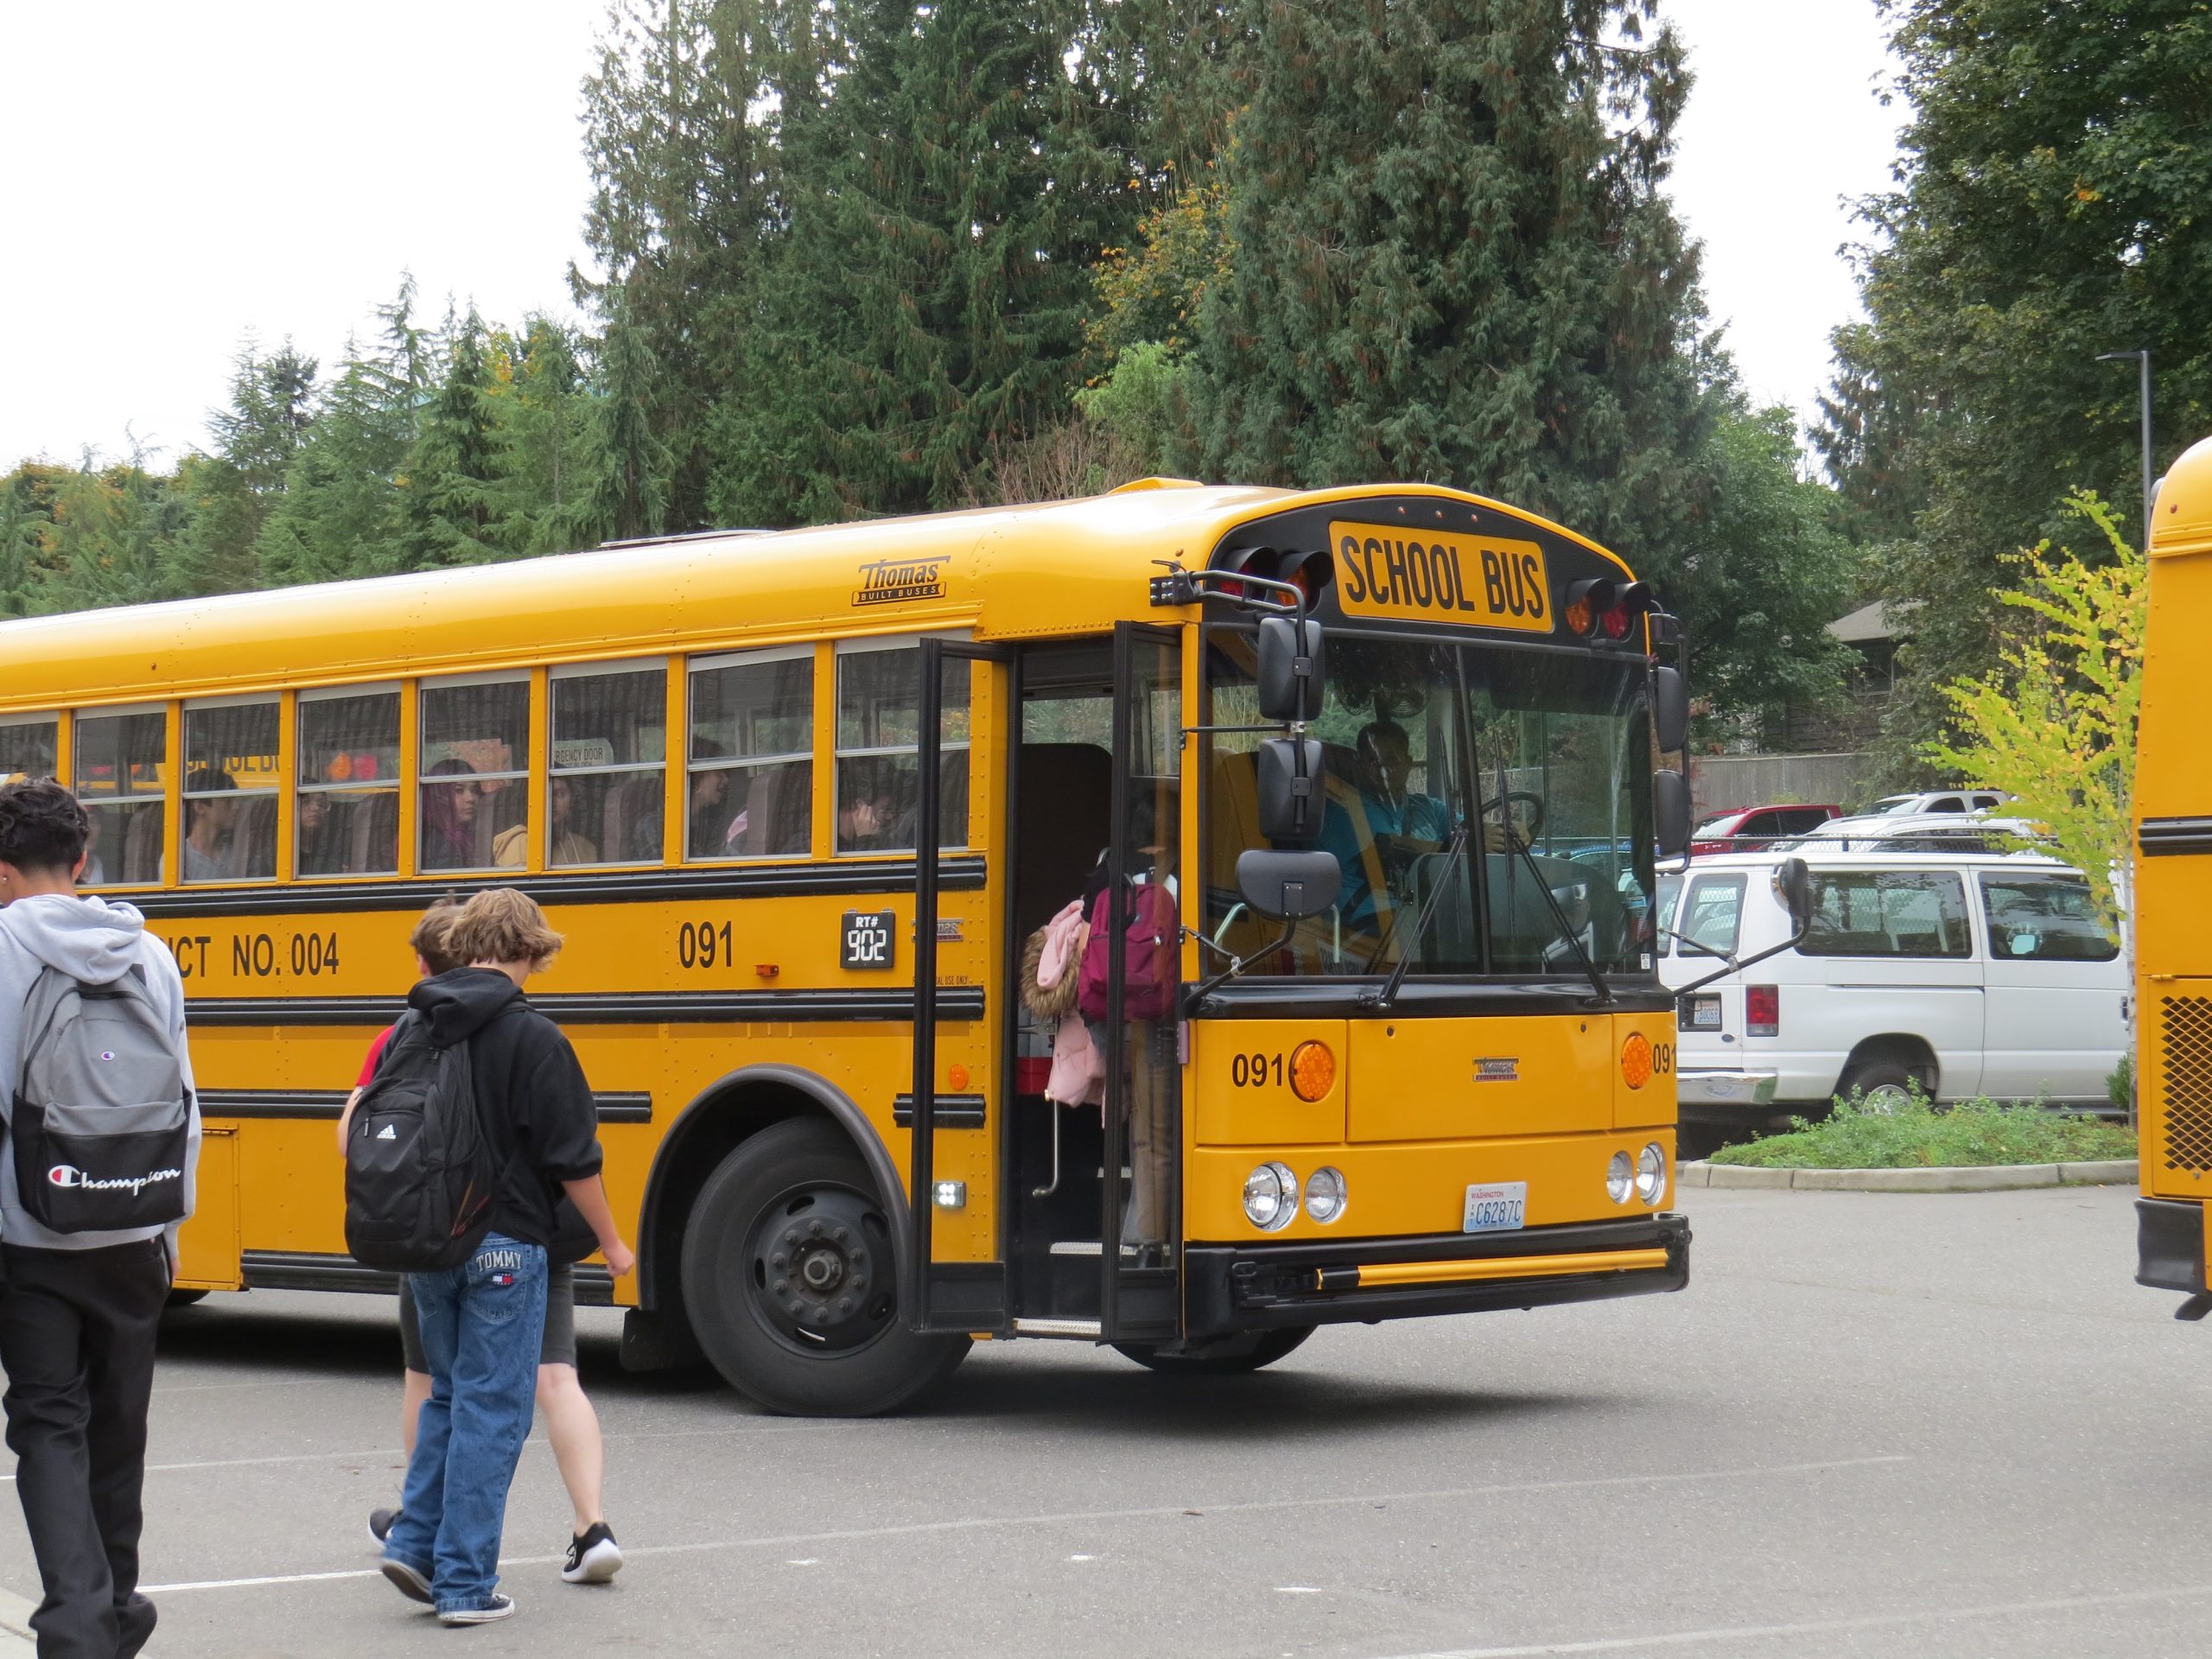 Students enter the bus after a full school day.